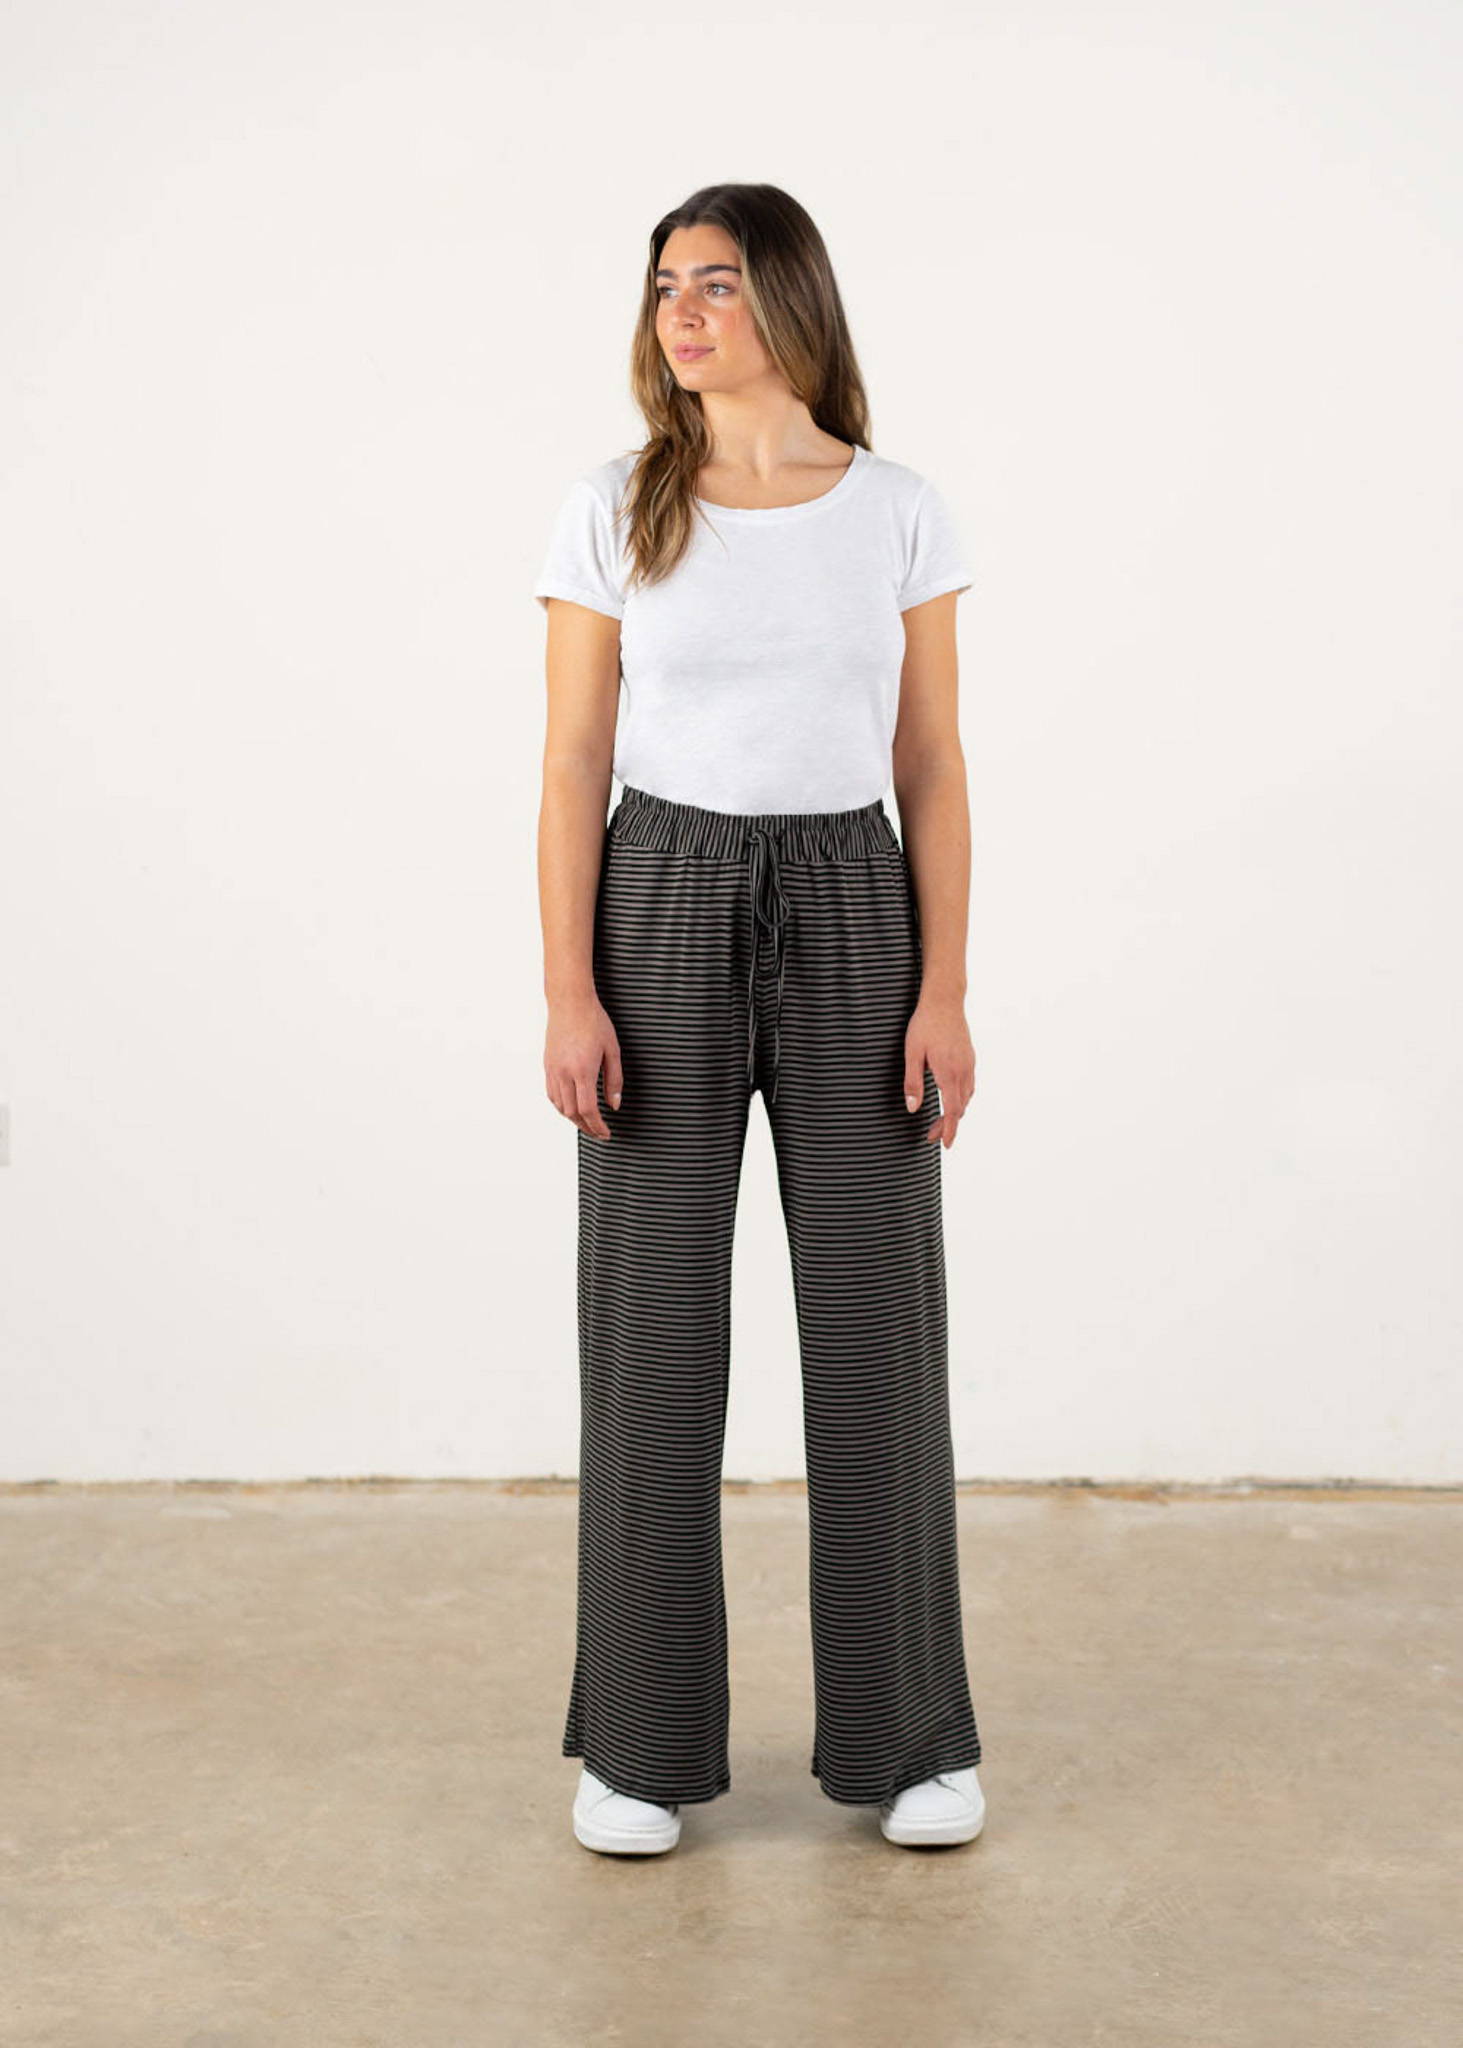 A model wearing a white short sleeve t shirt with khaki and black wide leg jersey trousers and white trainers